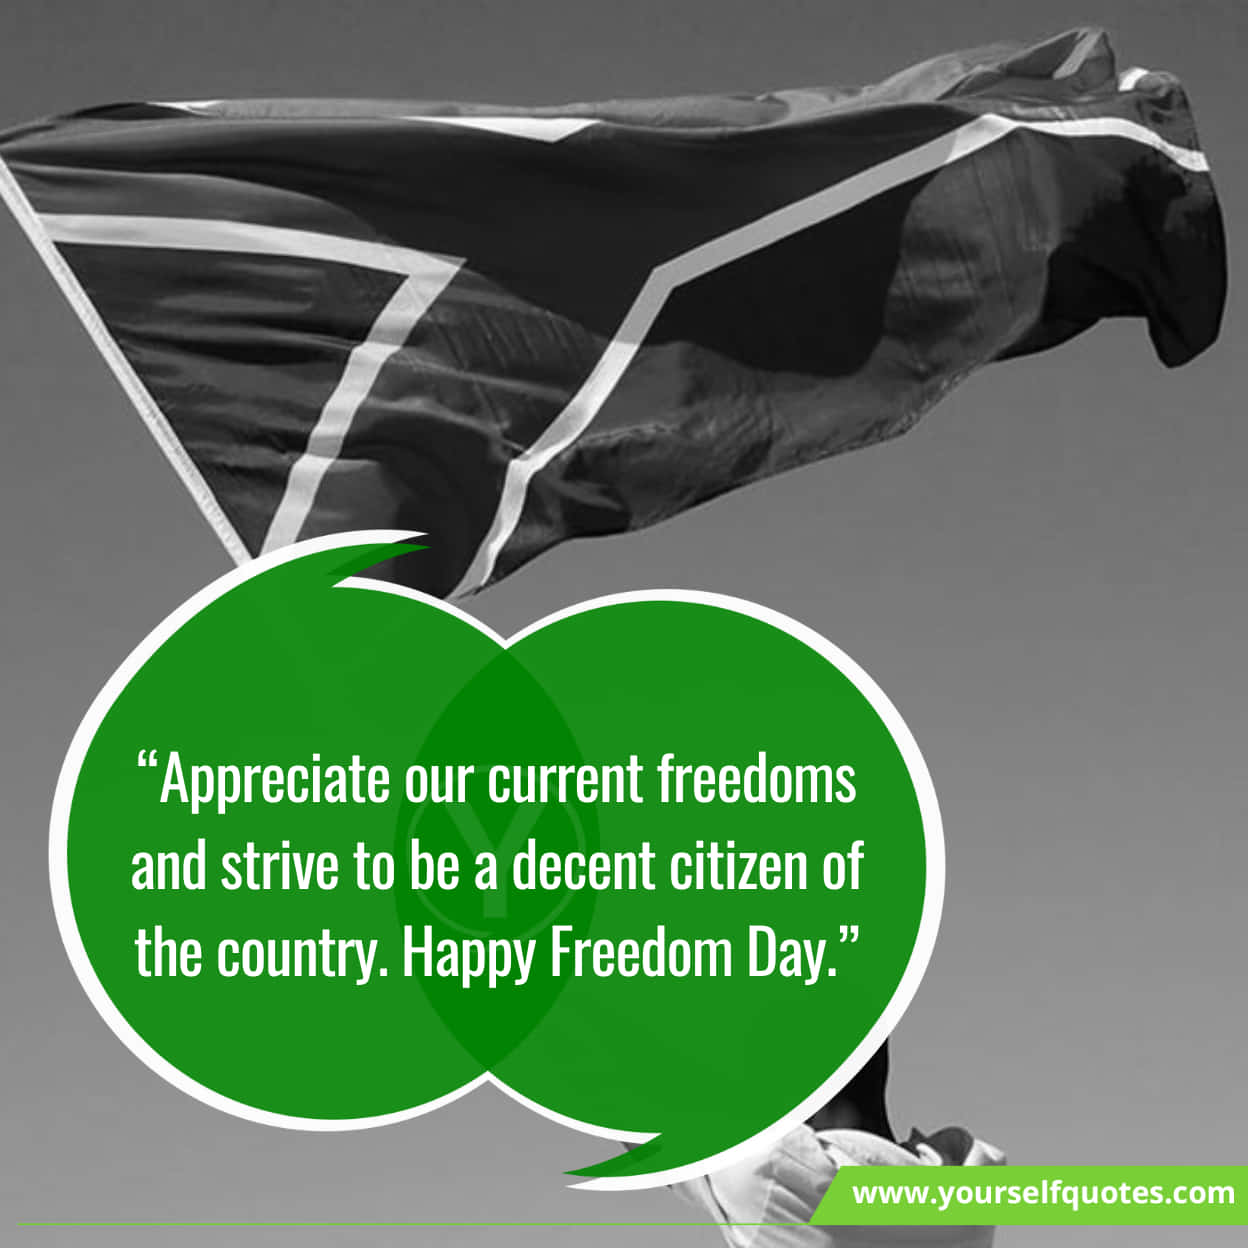 Happy Freedom Day Quotes, Wishes & Messages